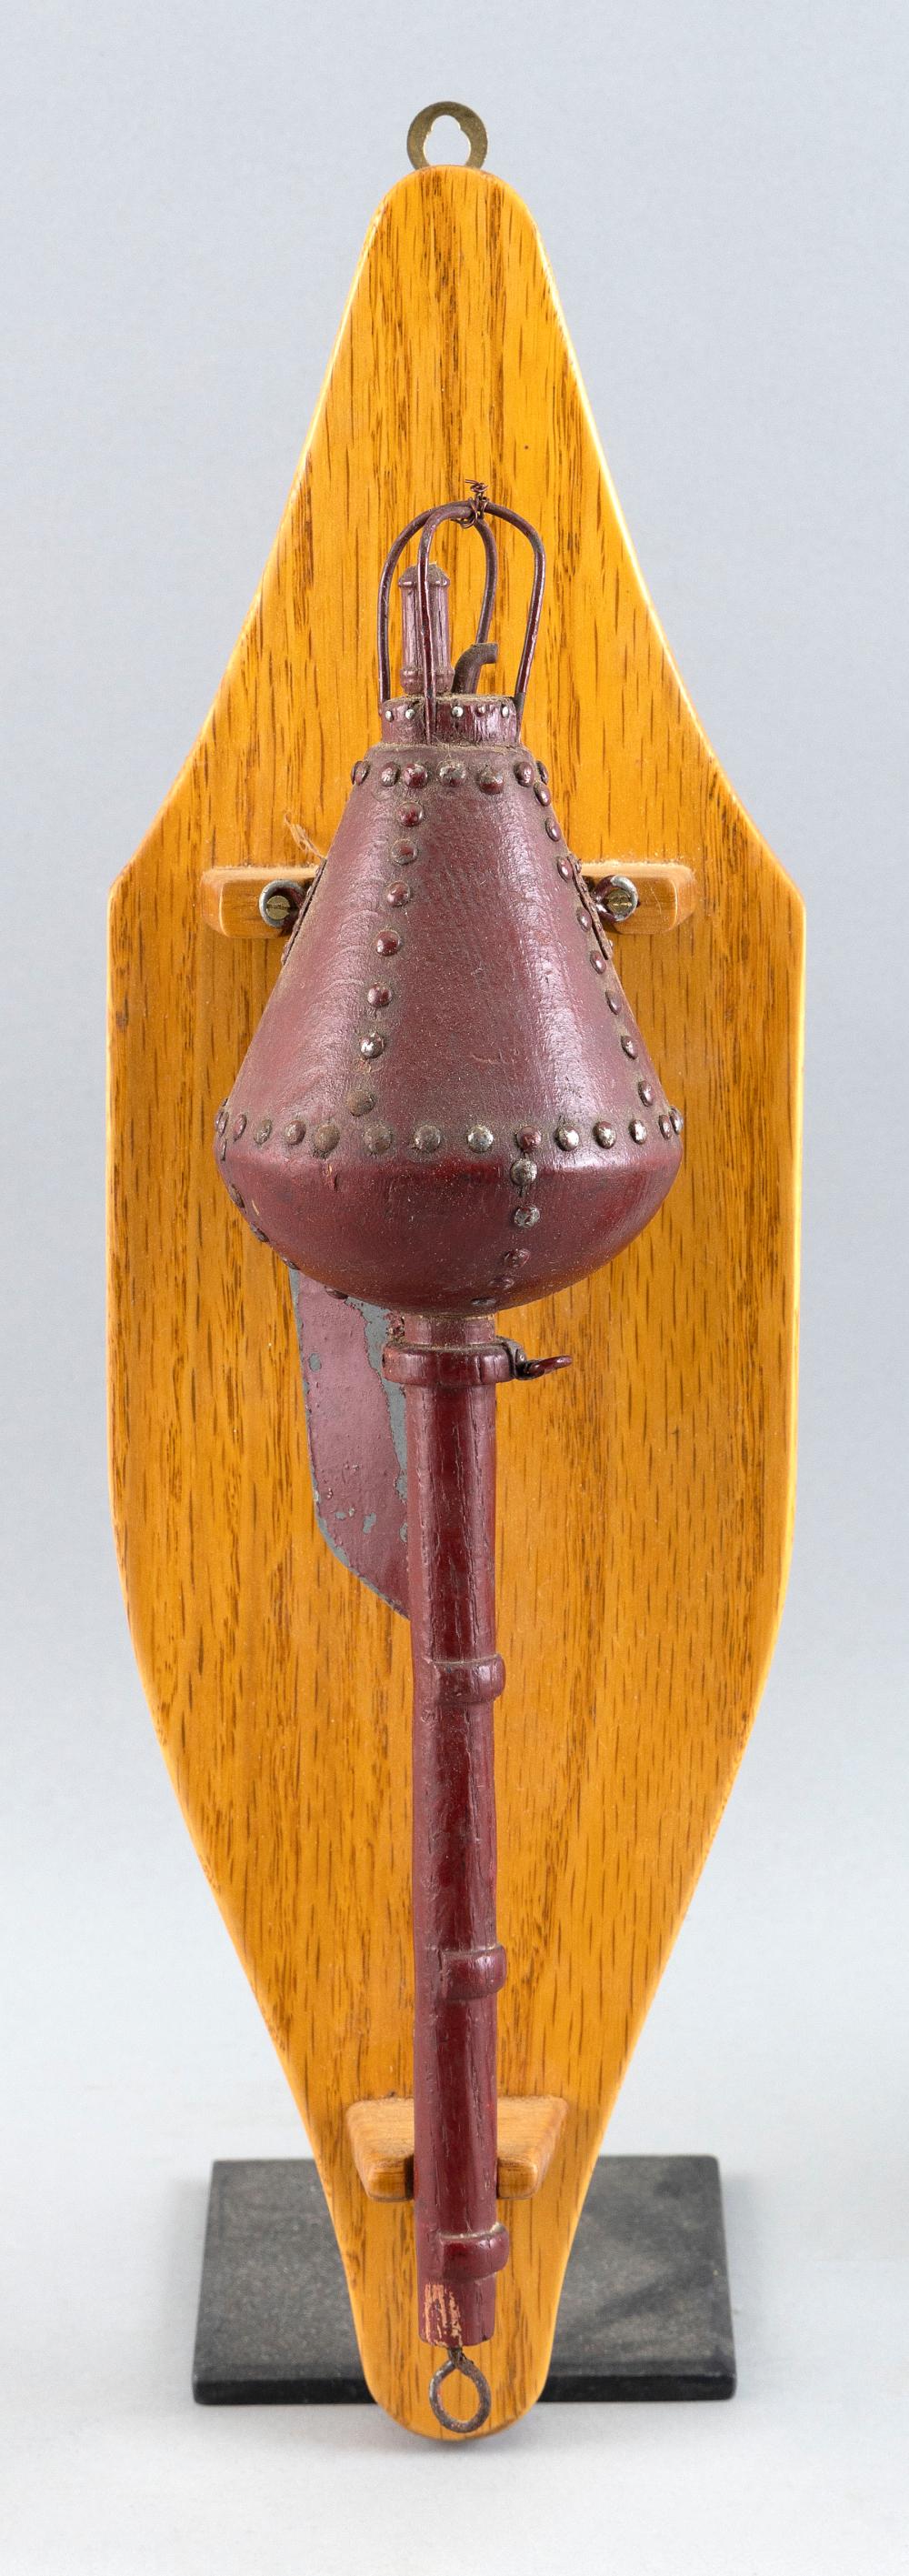 MOUNTED MODEL OF A RED NUN BUOY 35064b